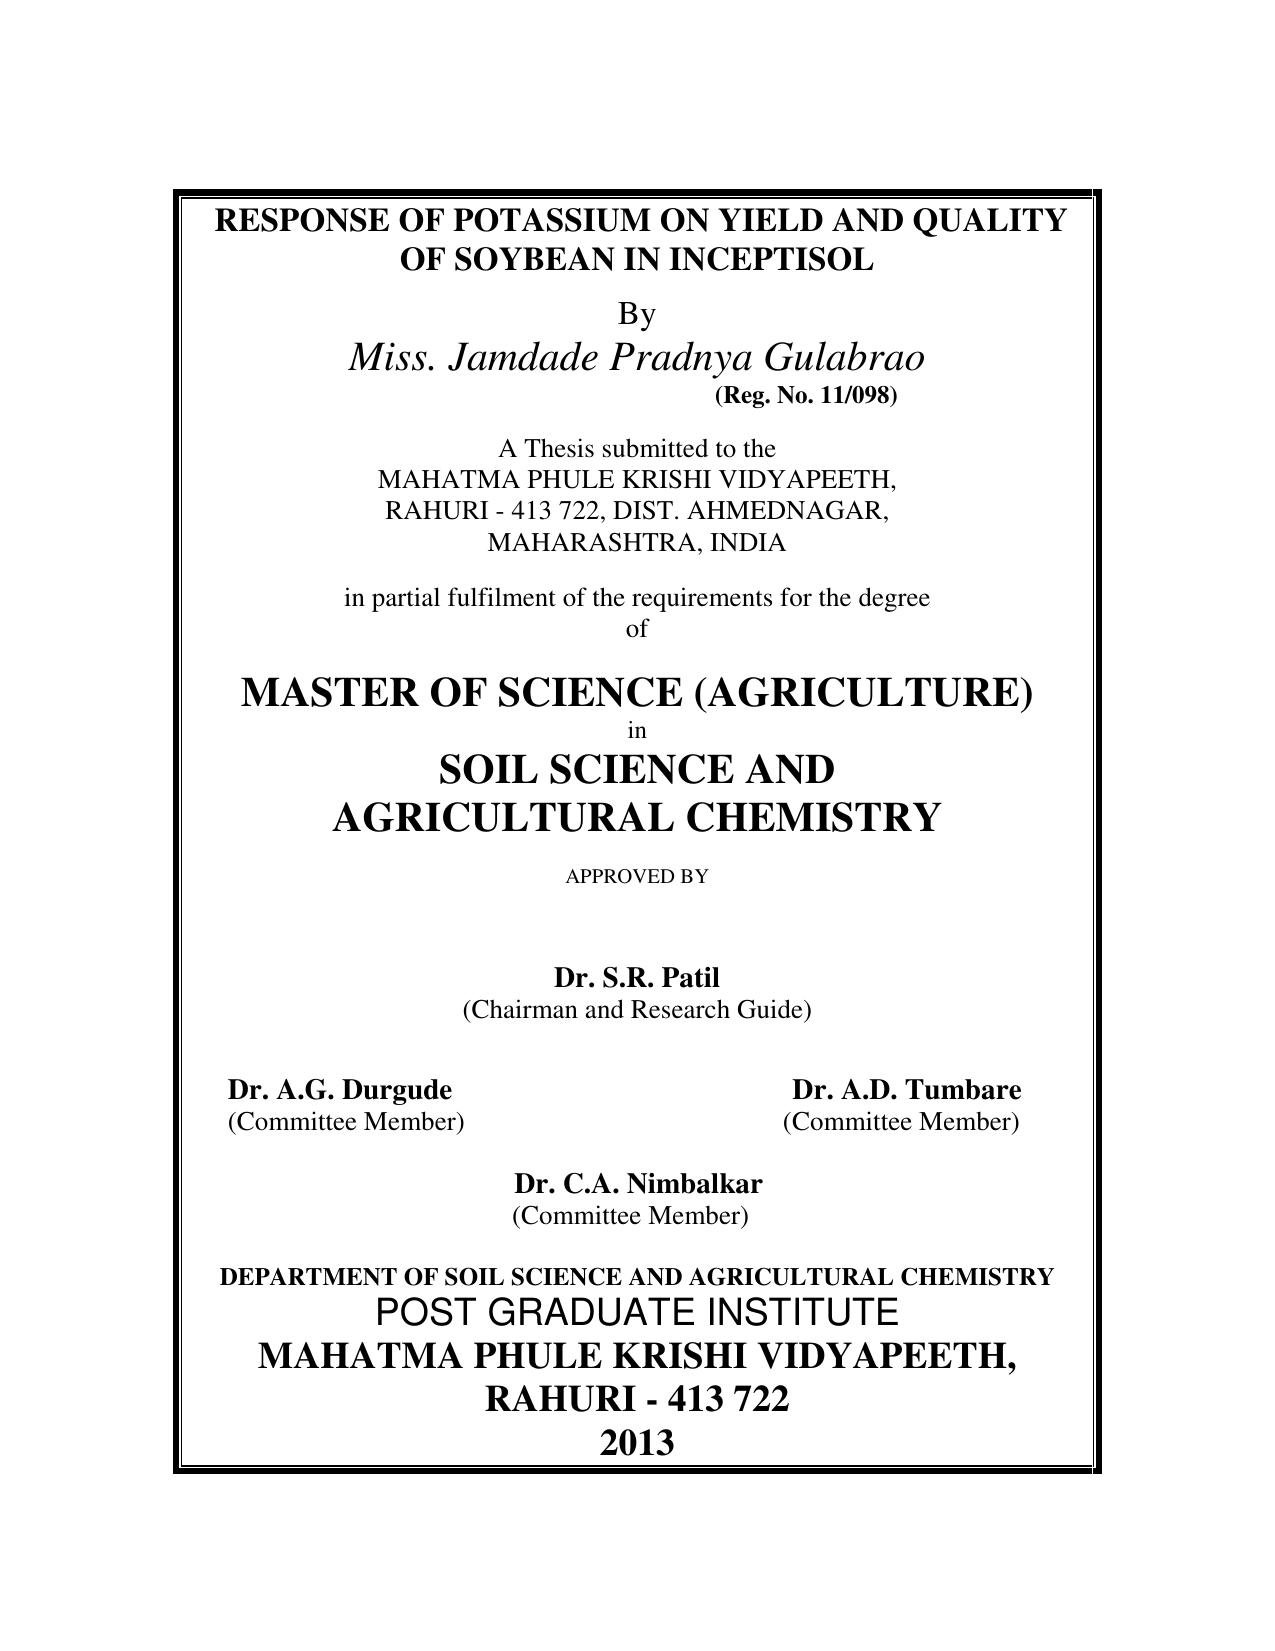 (AGRICULTURE) SOIL SCIENCE AND AGRICULTURAL CHEMISTRY 2013